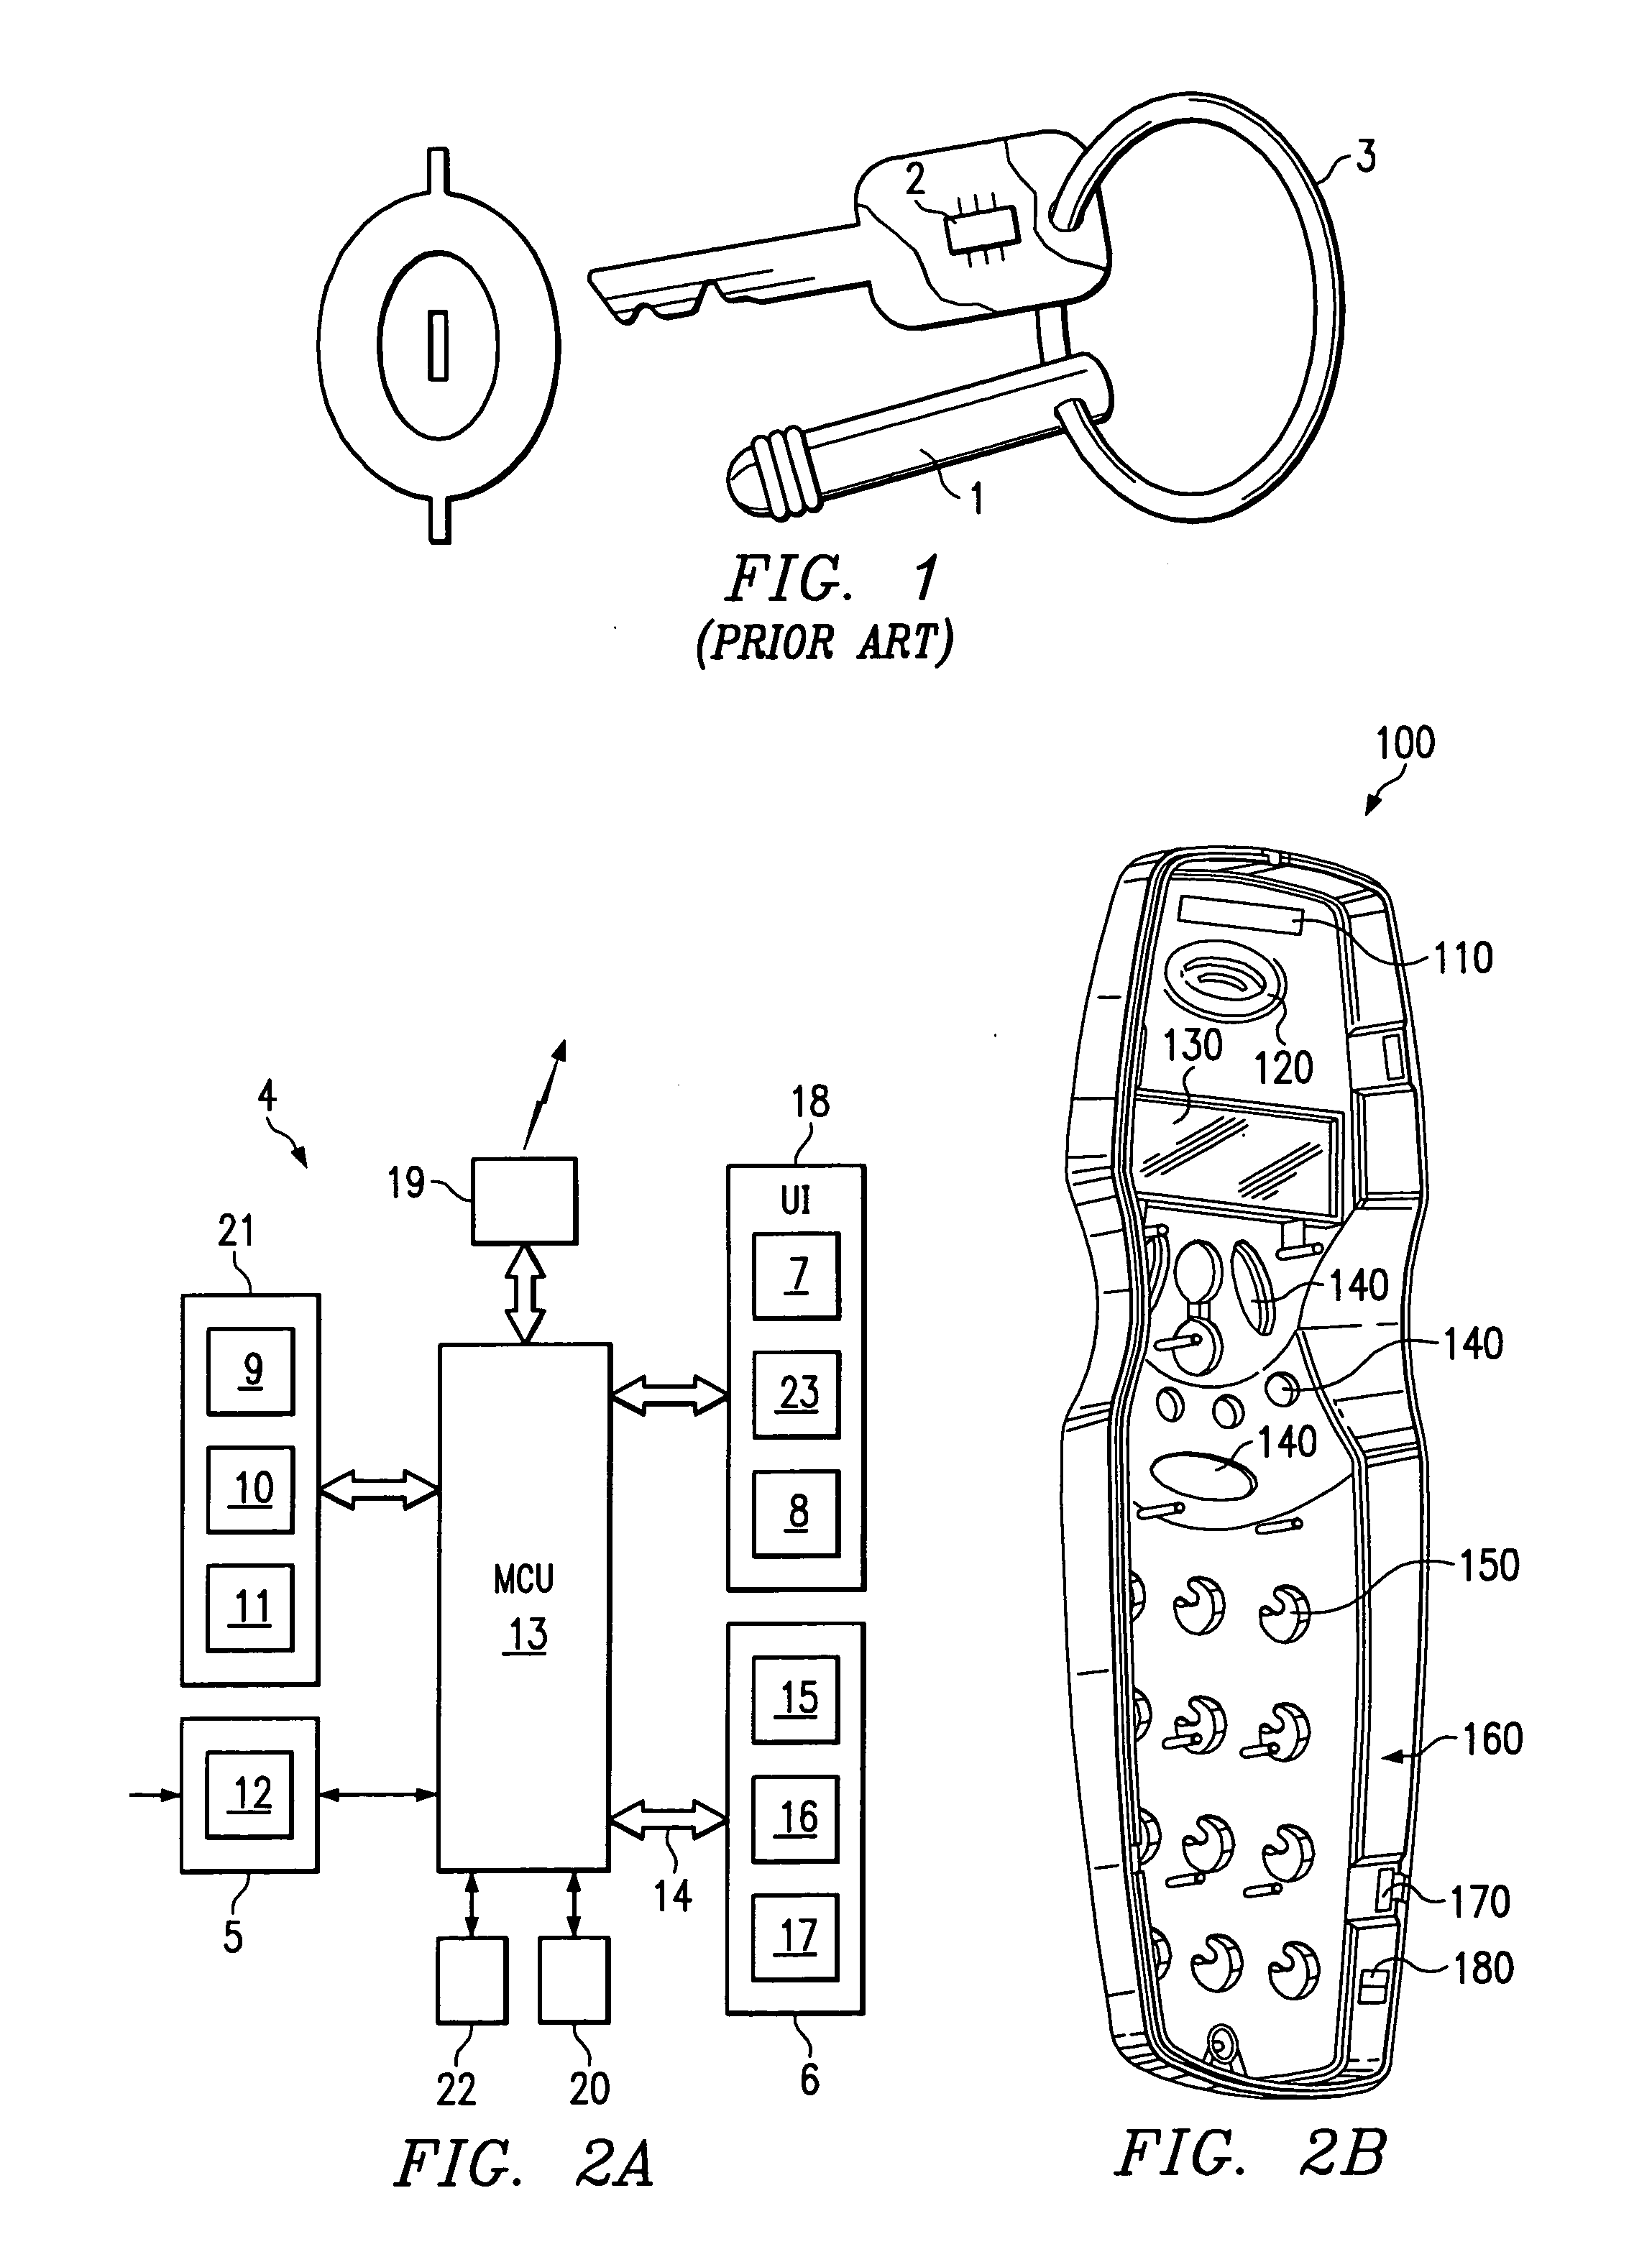 System and method of making payments using an electronic device cover with embedded transponder